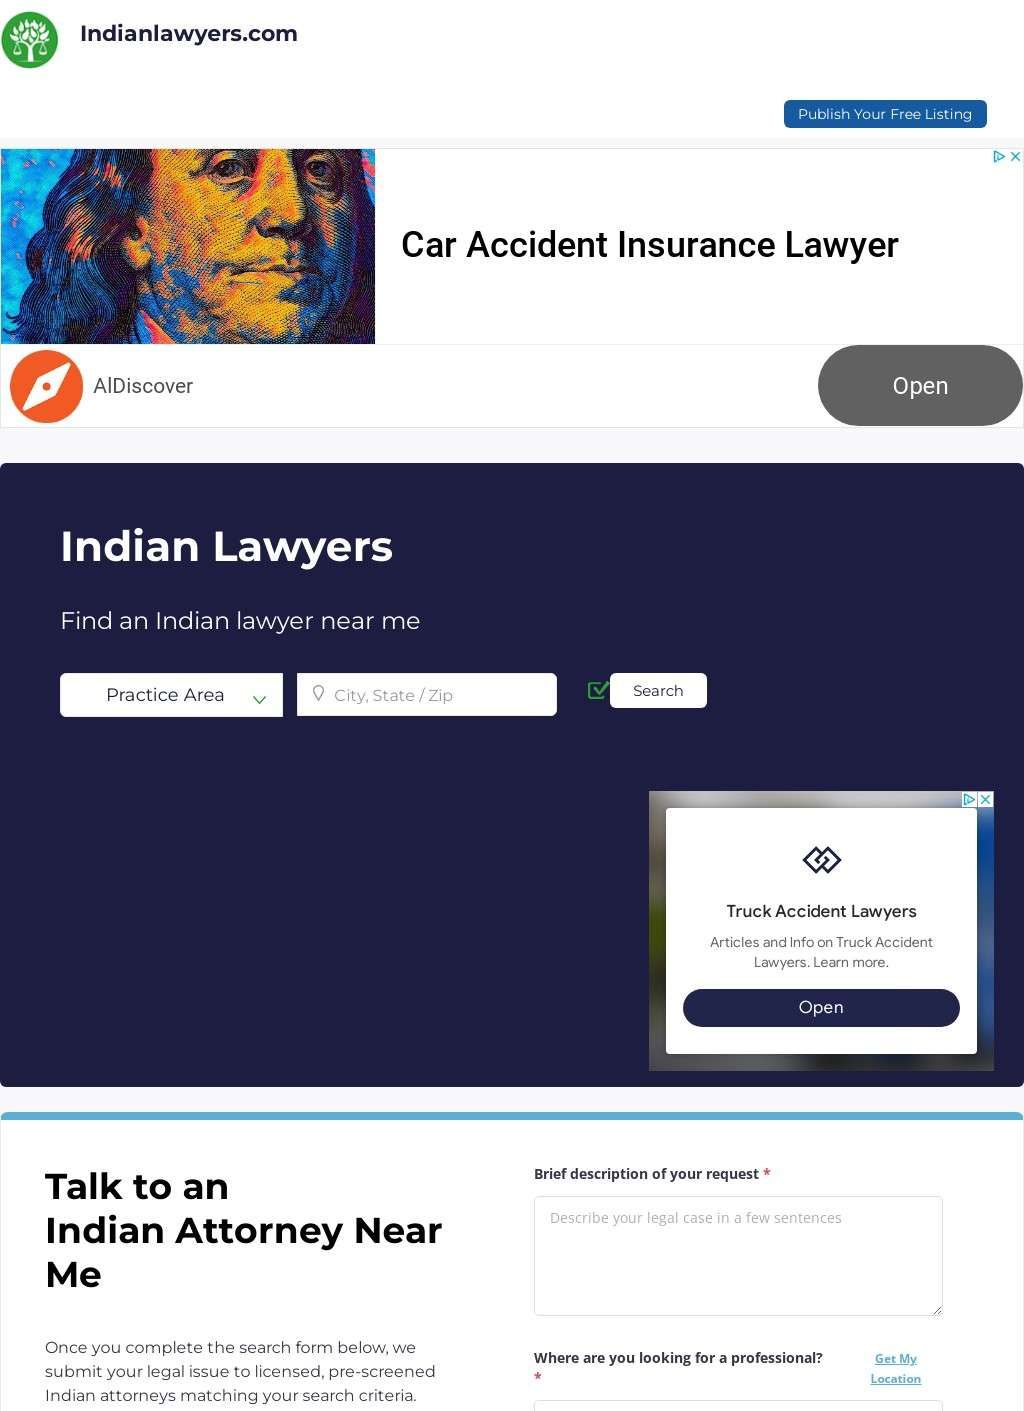 Indian Lawyers